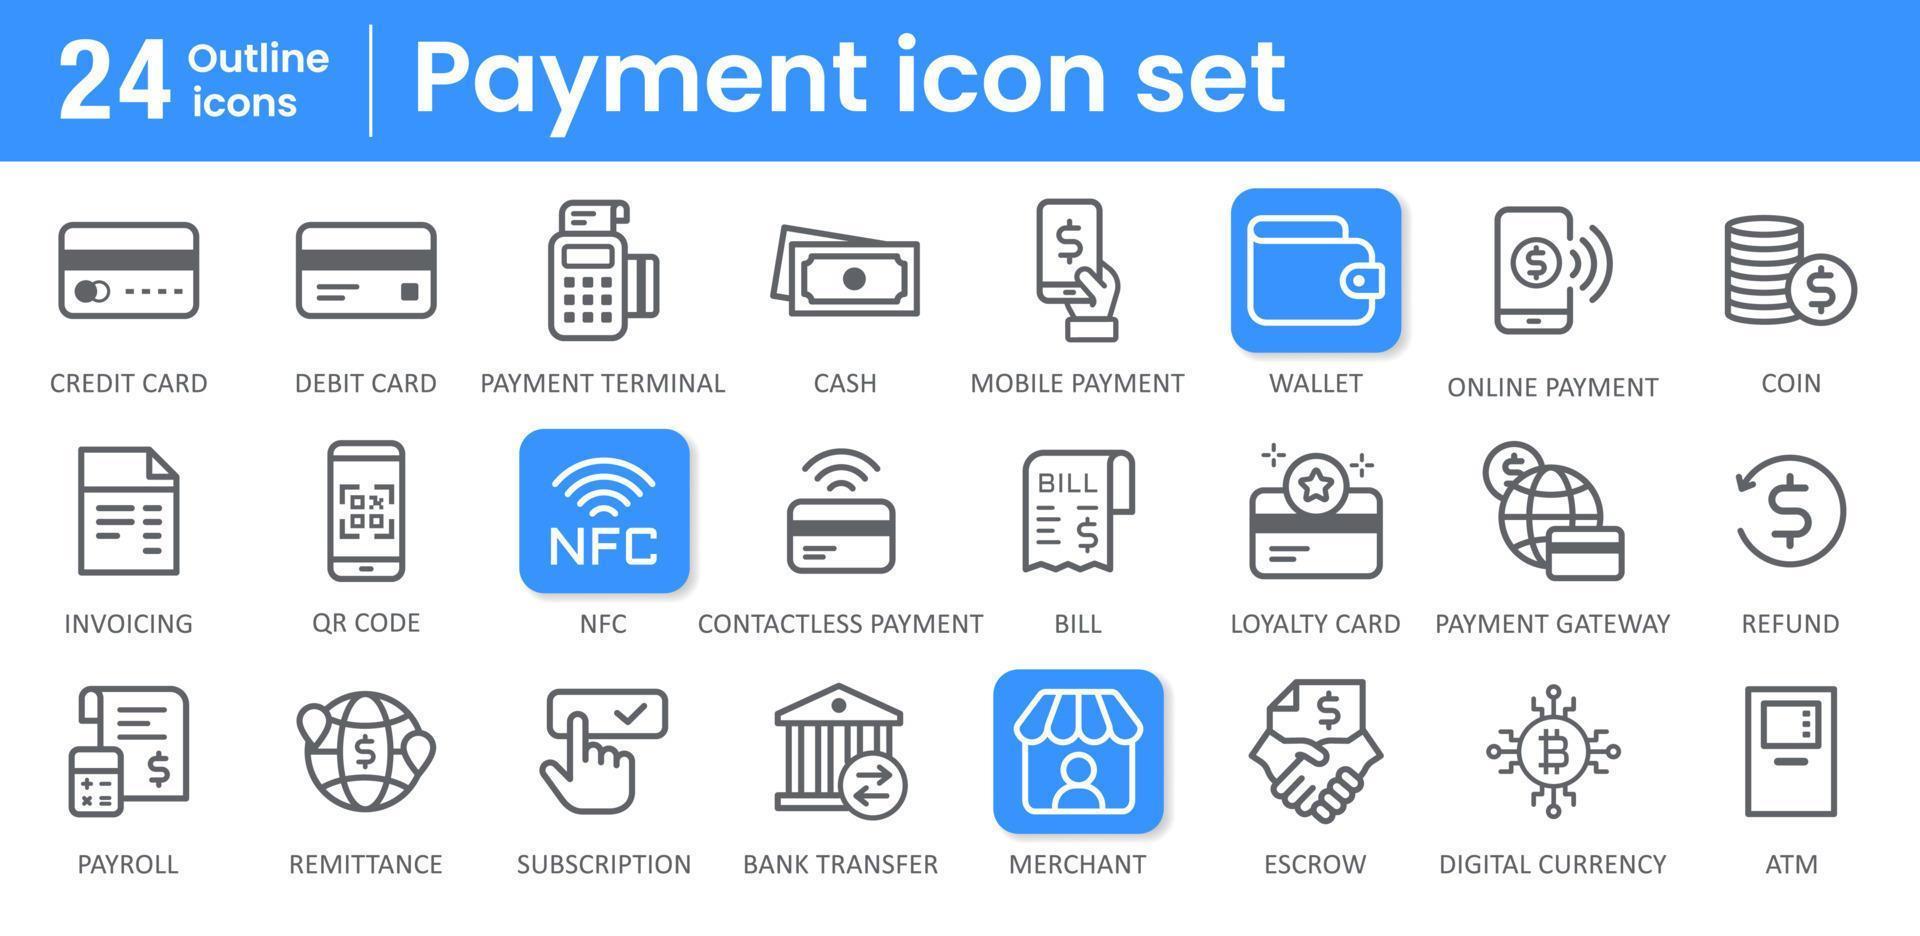 Payment icon set. Contains icons of payment methods and processes. Vector illustration